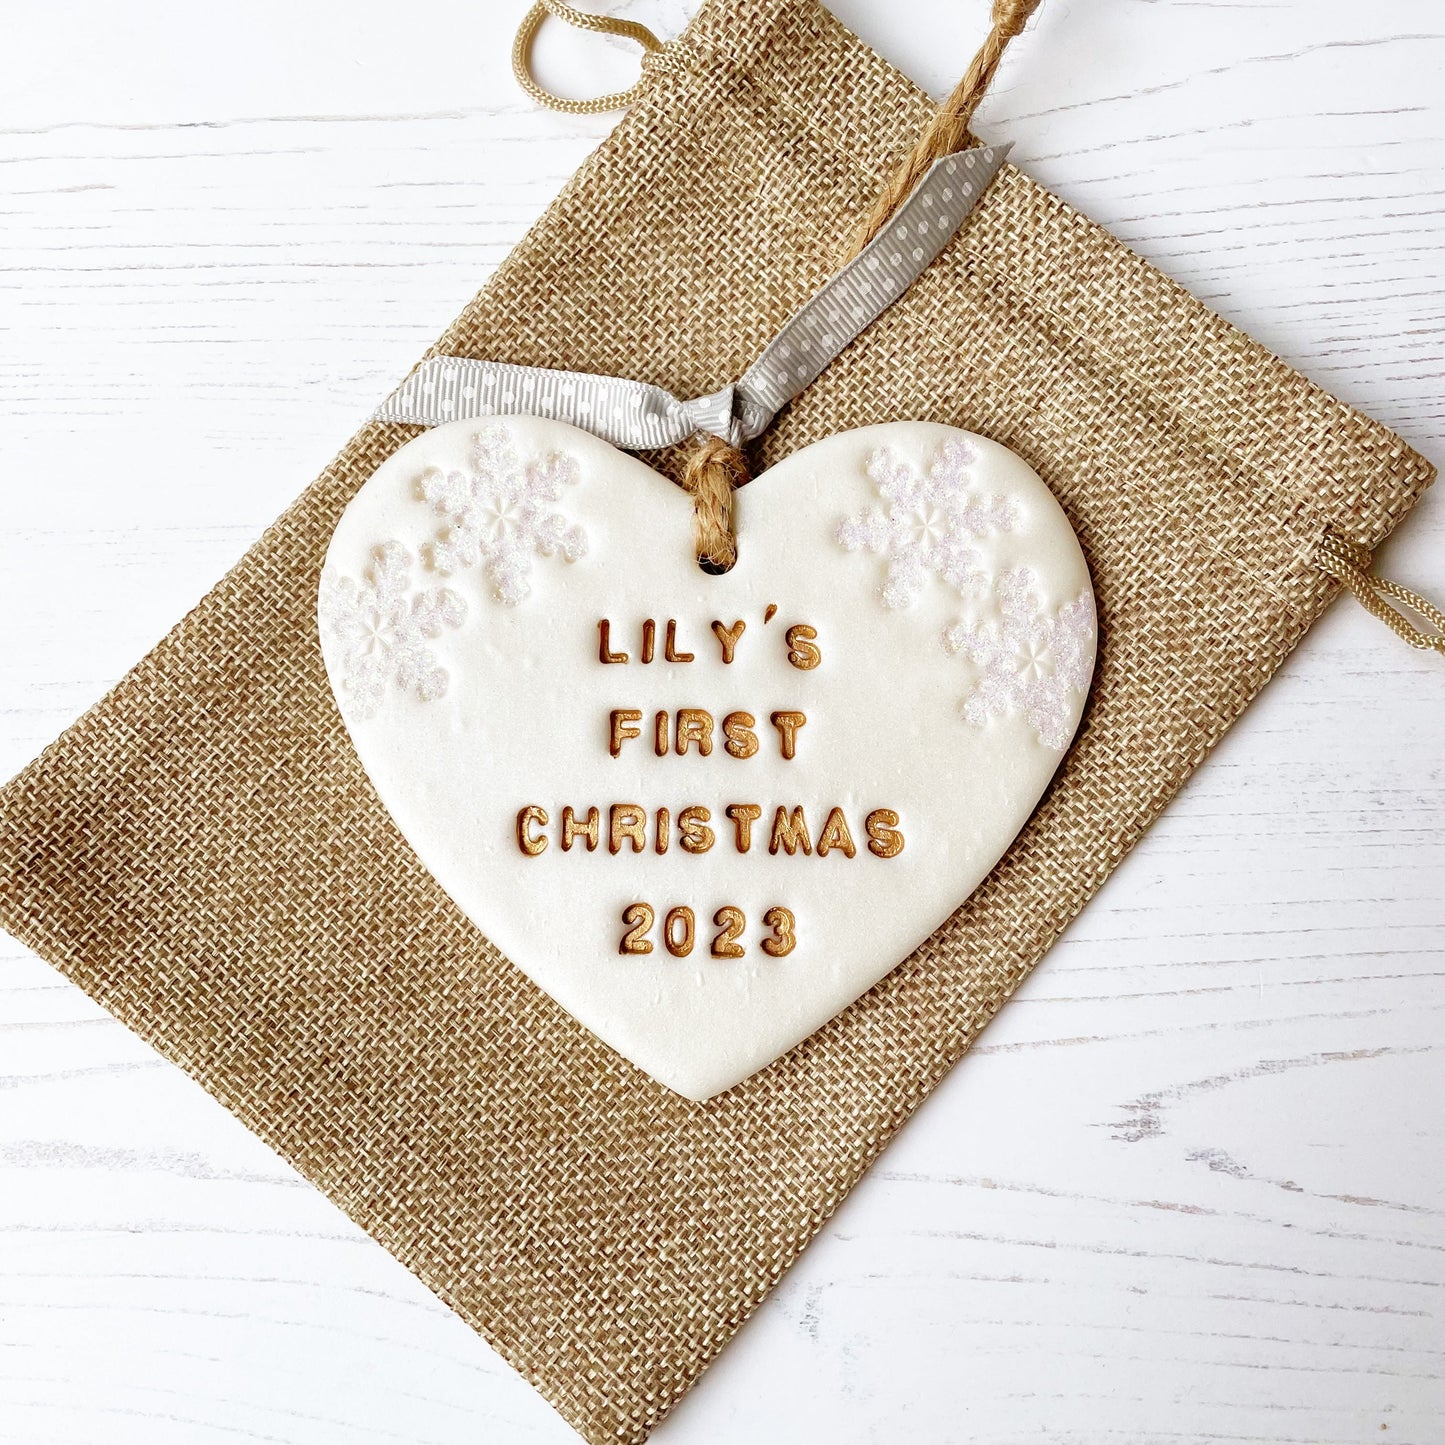 Personalised baby's first Christmas heart ornament, pearlised white clay with LILY'S FIRST CHRISTMAS 2023 painted gold, decorated with 2 iridescent glitter snowflakes on either side of the top of the heart